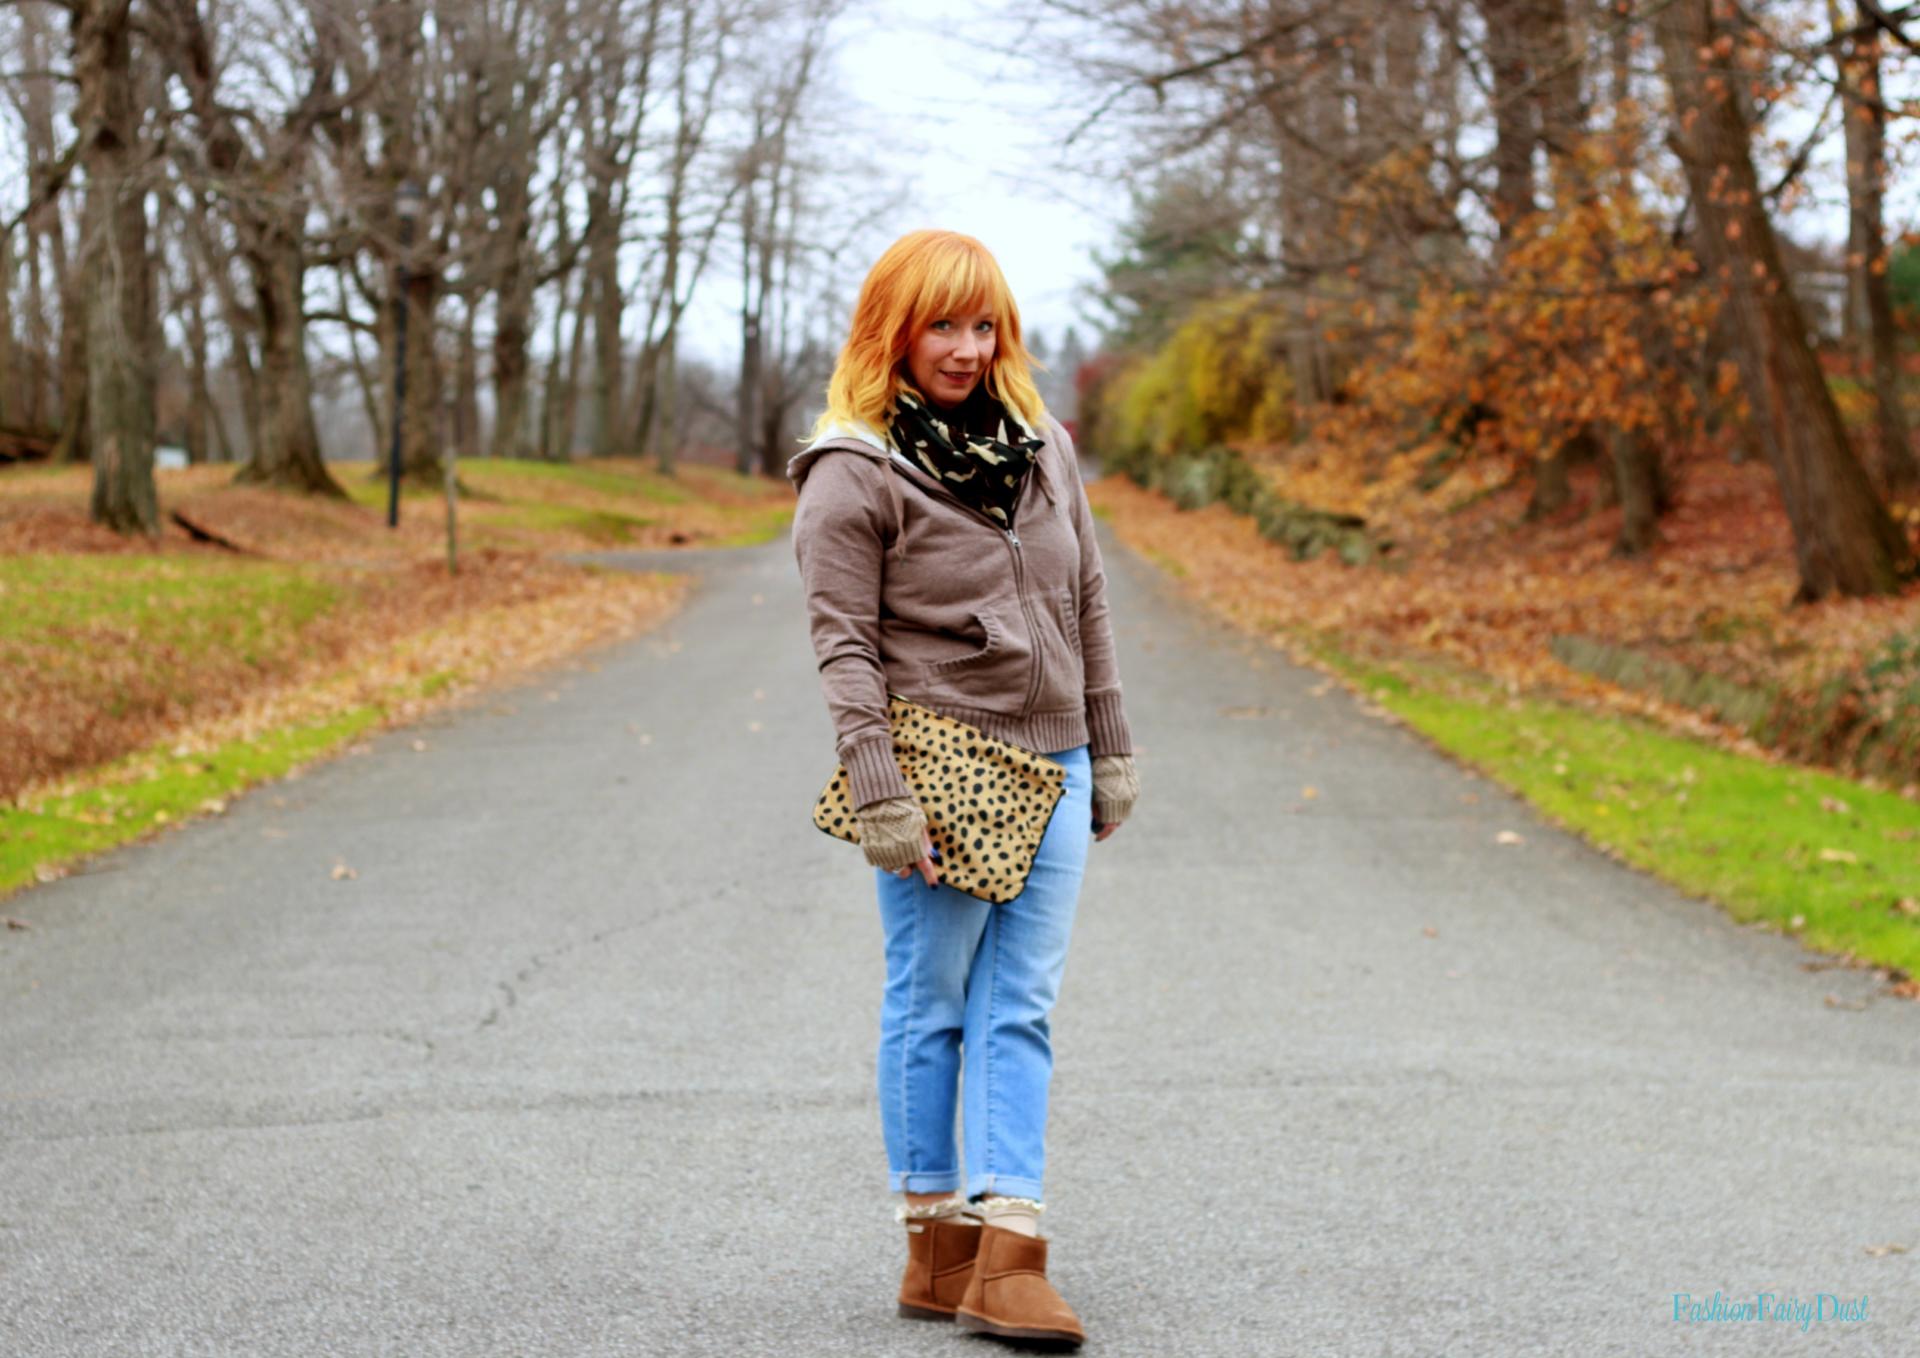 Bearpaw Boots, waffle knit top, camo scarf and fingerless gloves. How to stay warm but still look good.